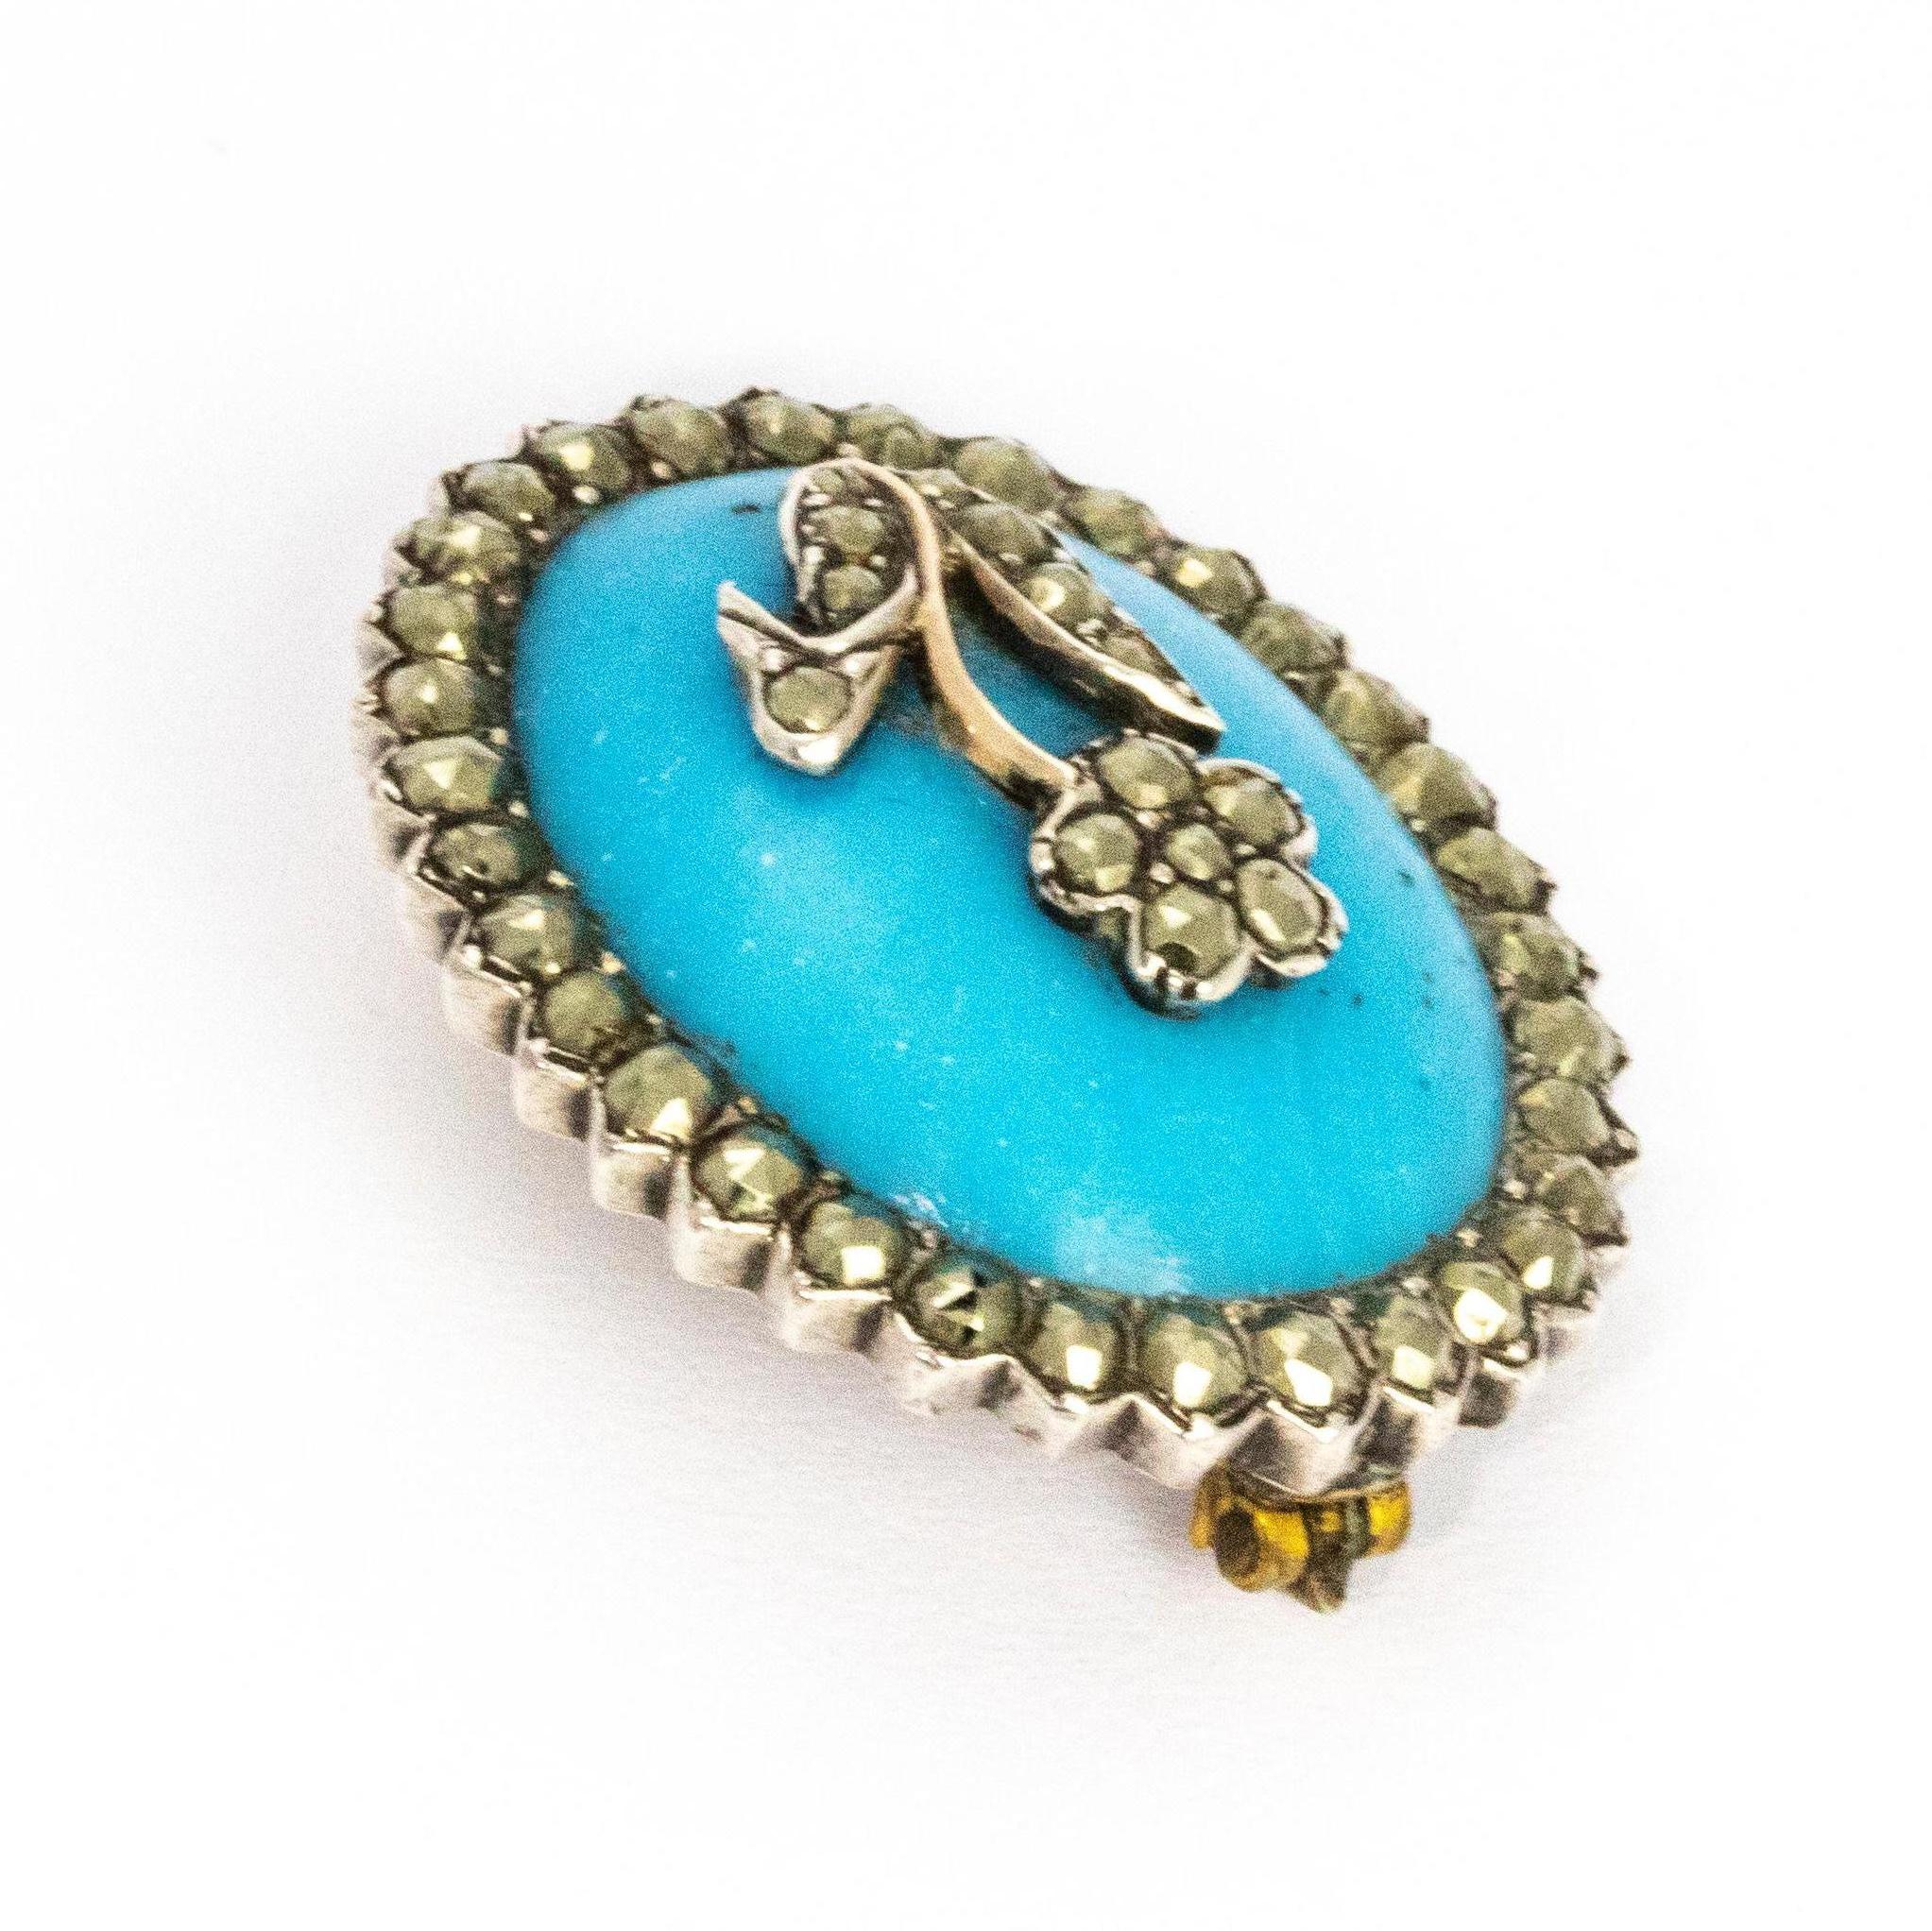 Forget me not flower mounted on a beautifully bright blue resin brooch surrounded by a halo of marcasite. 